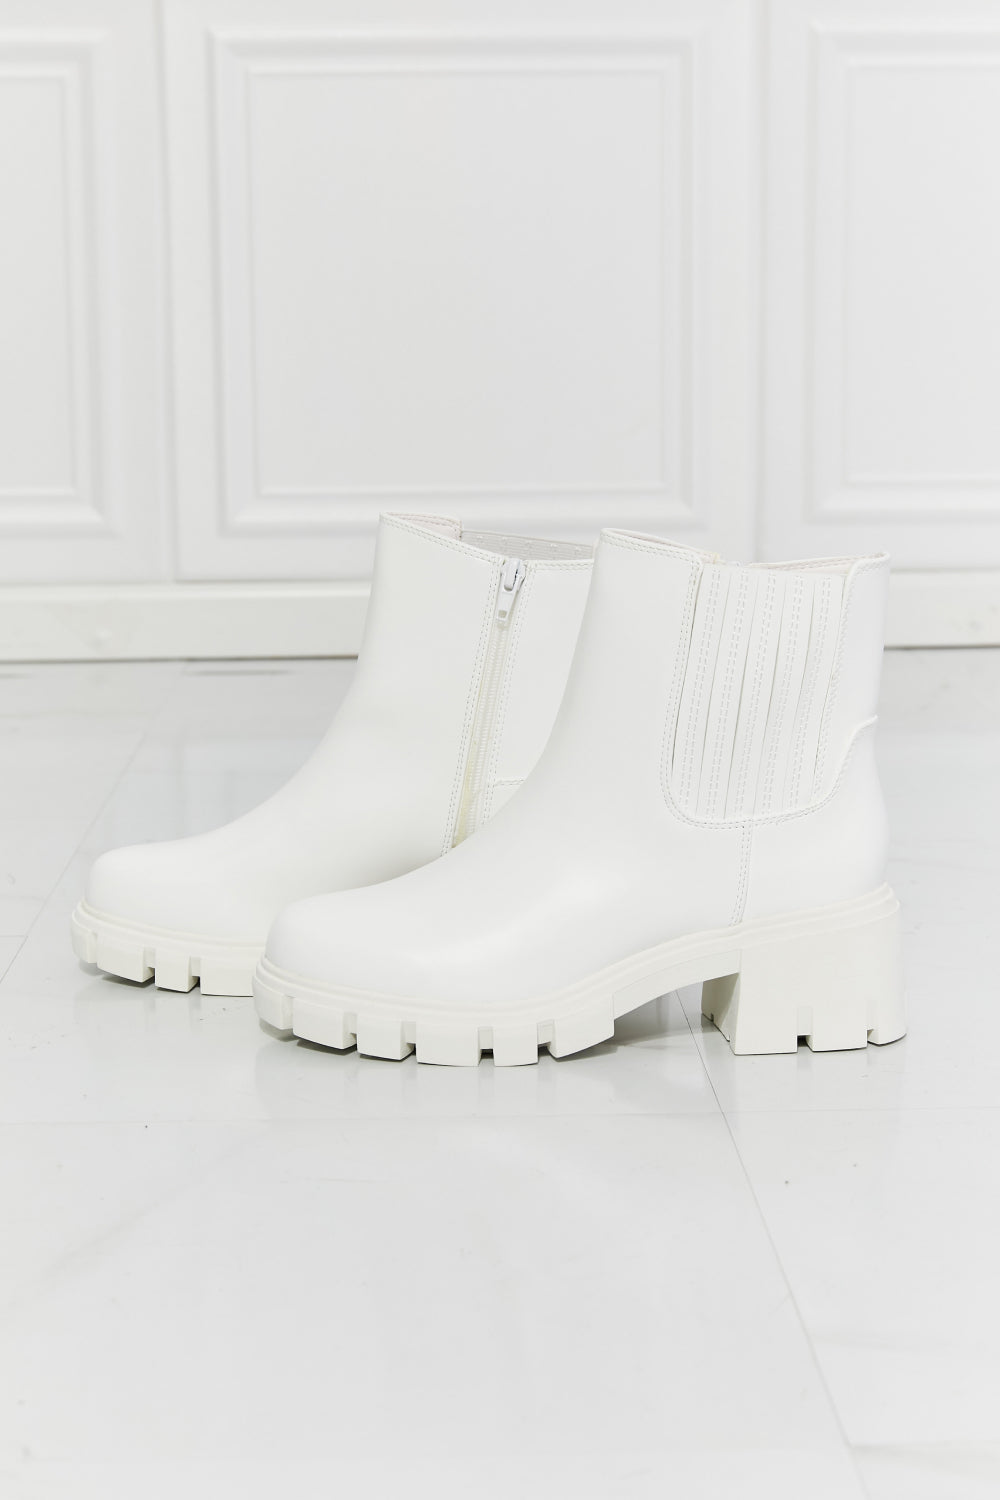 Walk Your Love Story in Style - Embody Urban Chic Dreams with What It Takes Lug Sole Chelsea Boots in White - Guy Christopher 